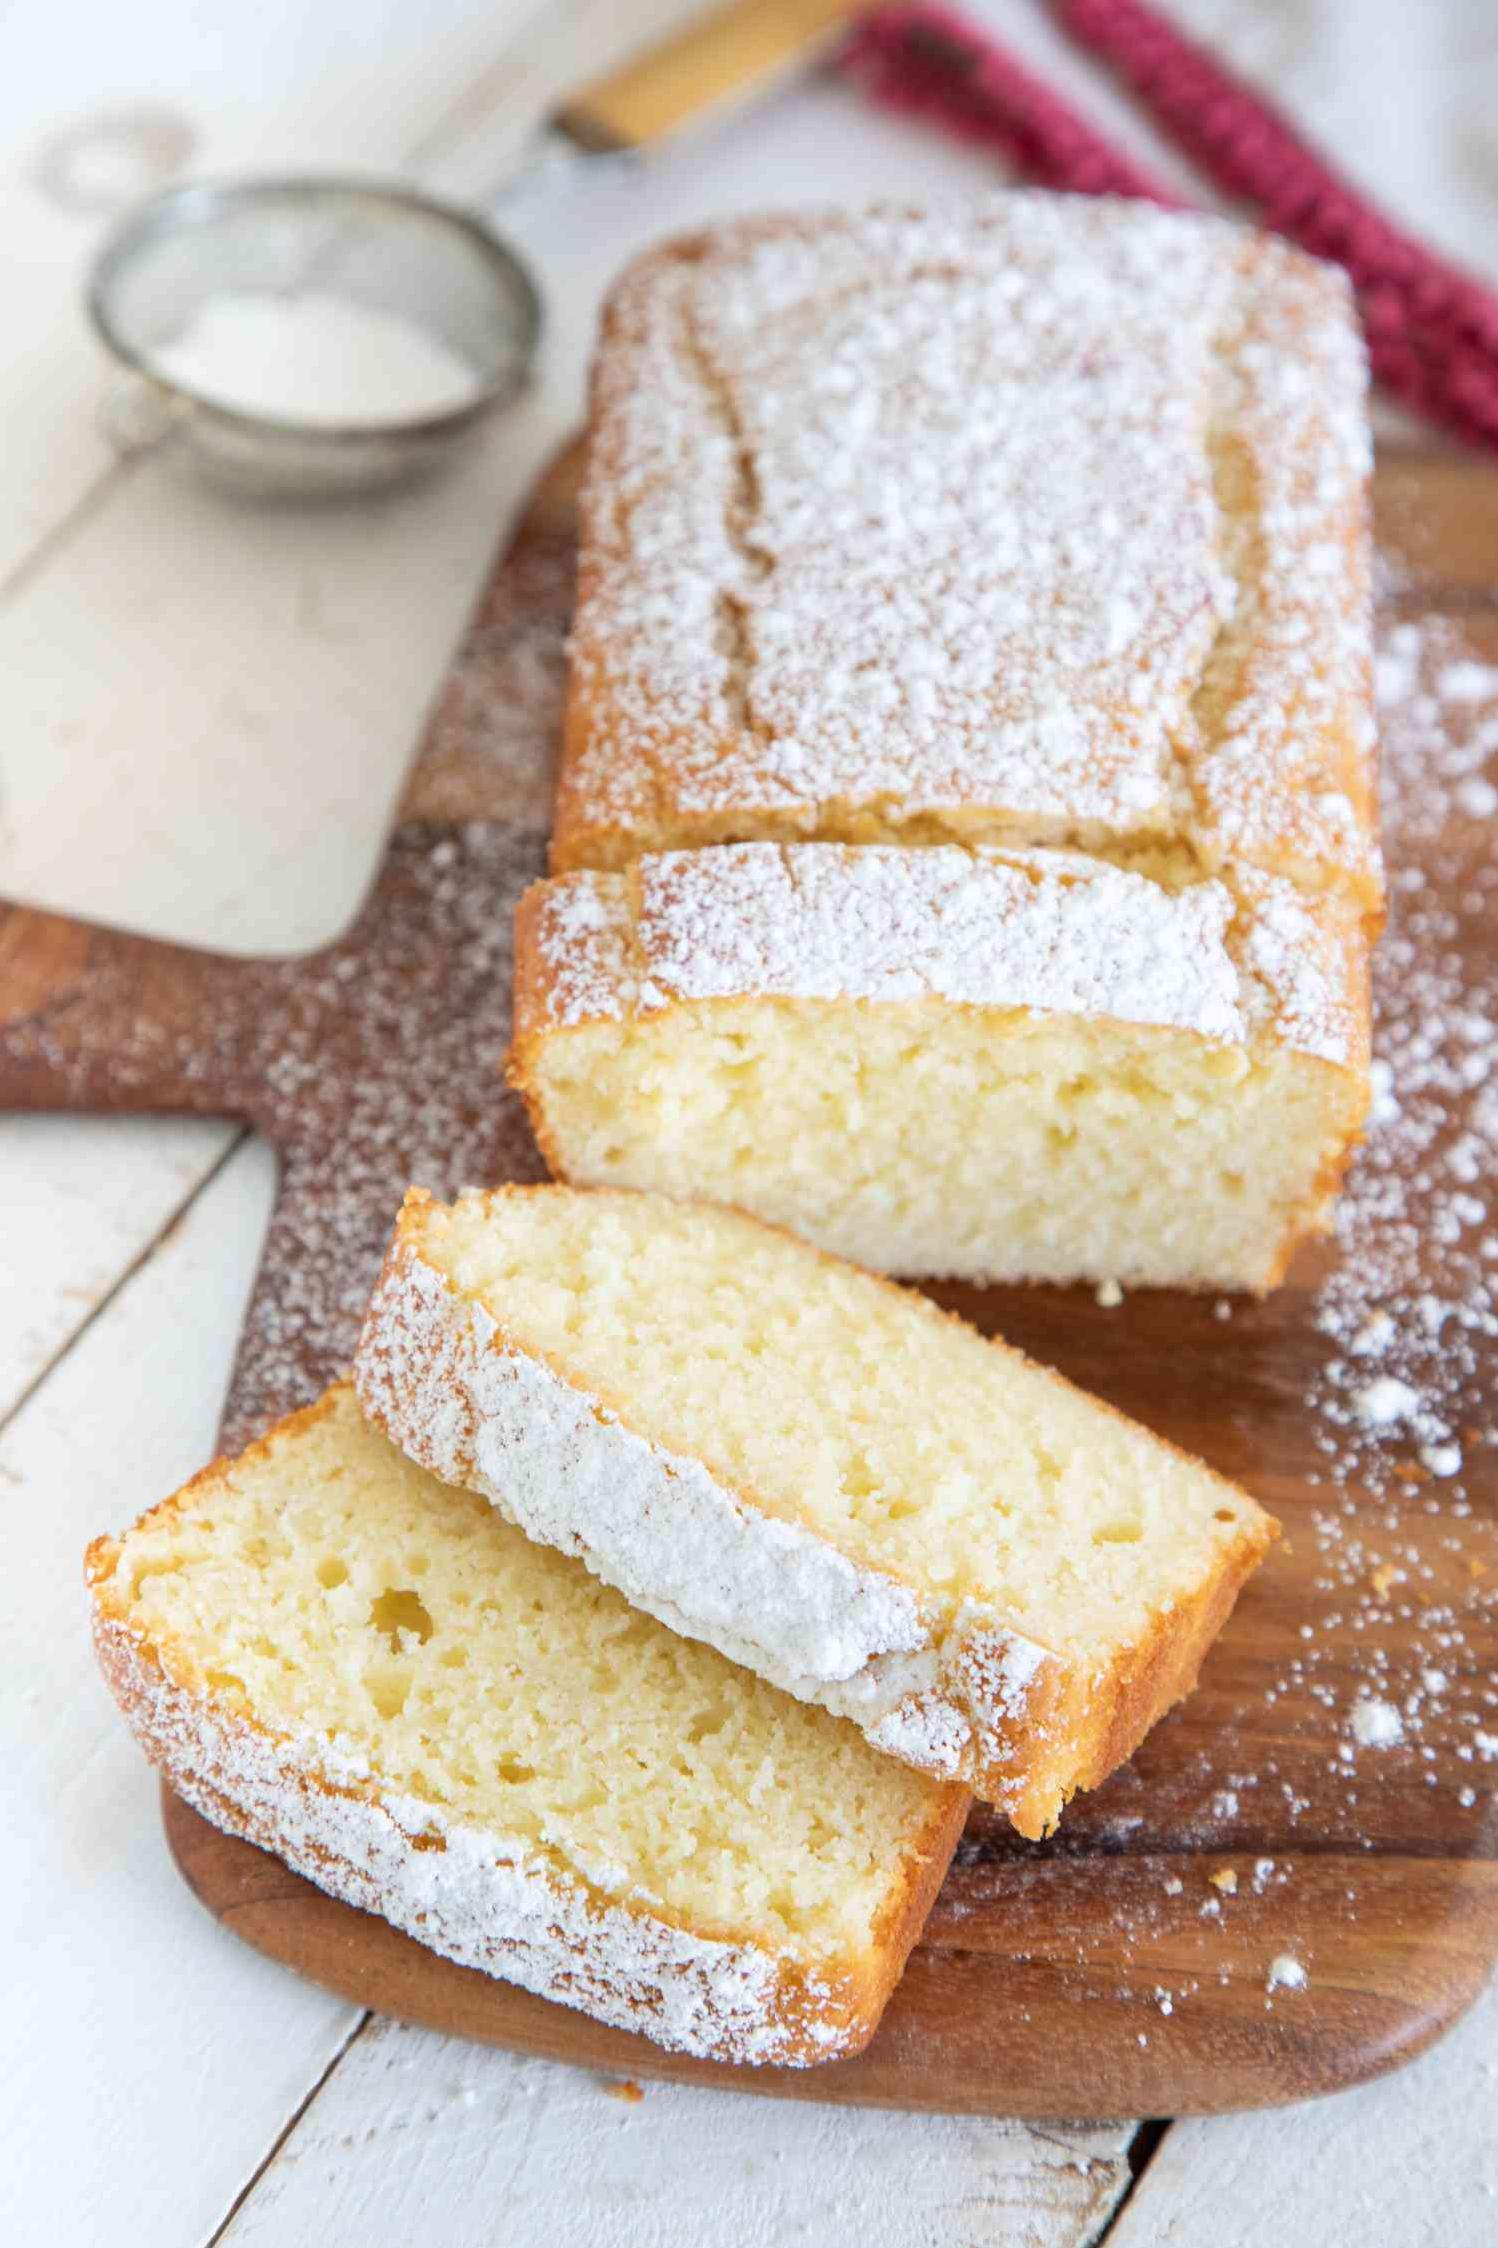  You can never go wrong with a classic pound cake made even better with yogurt.